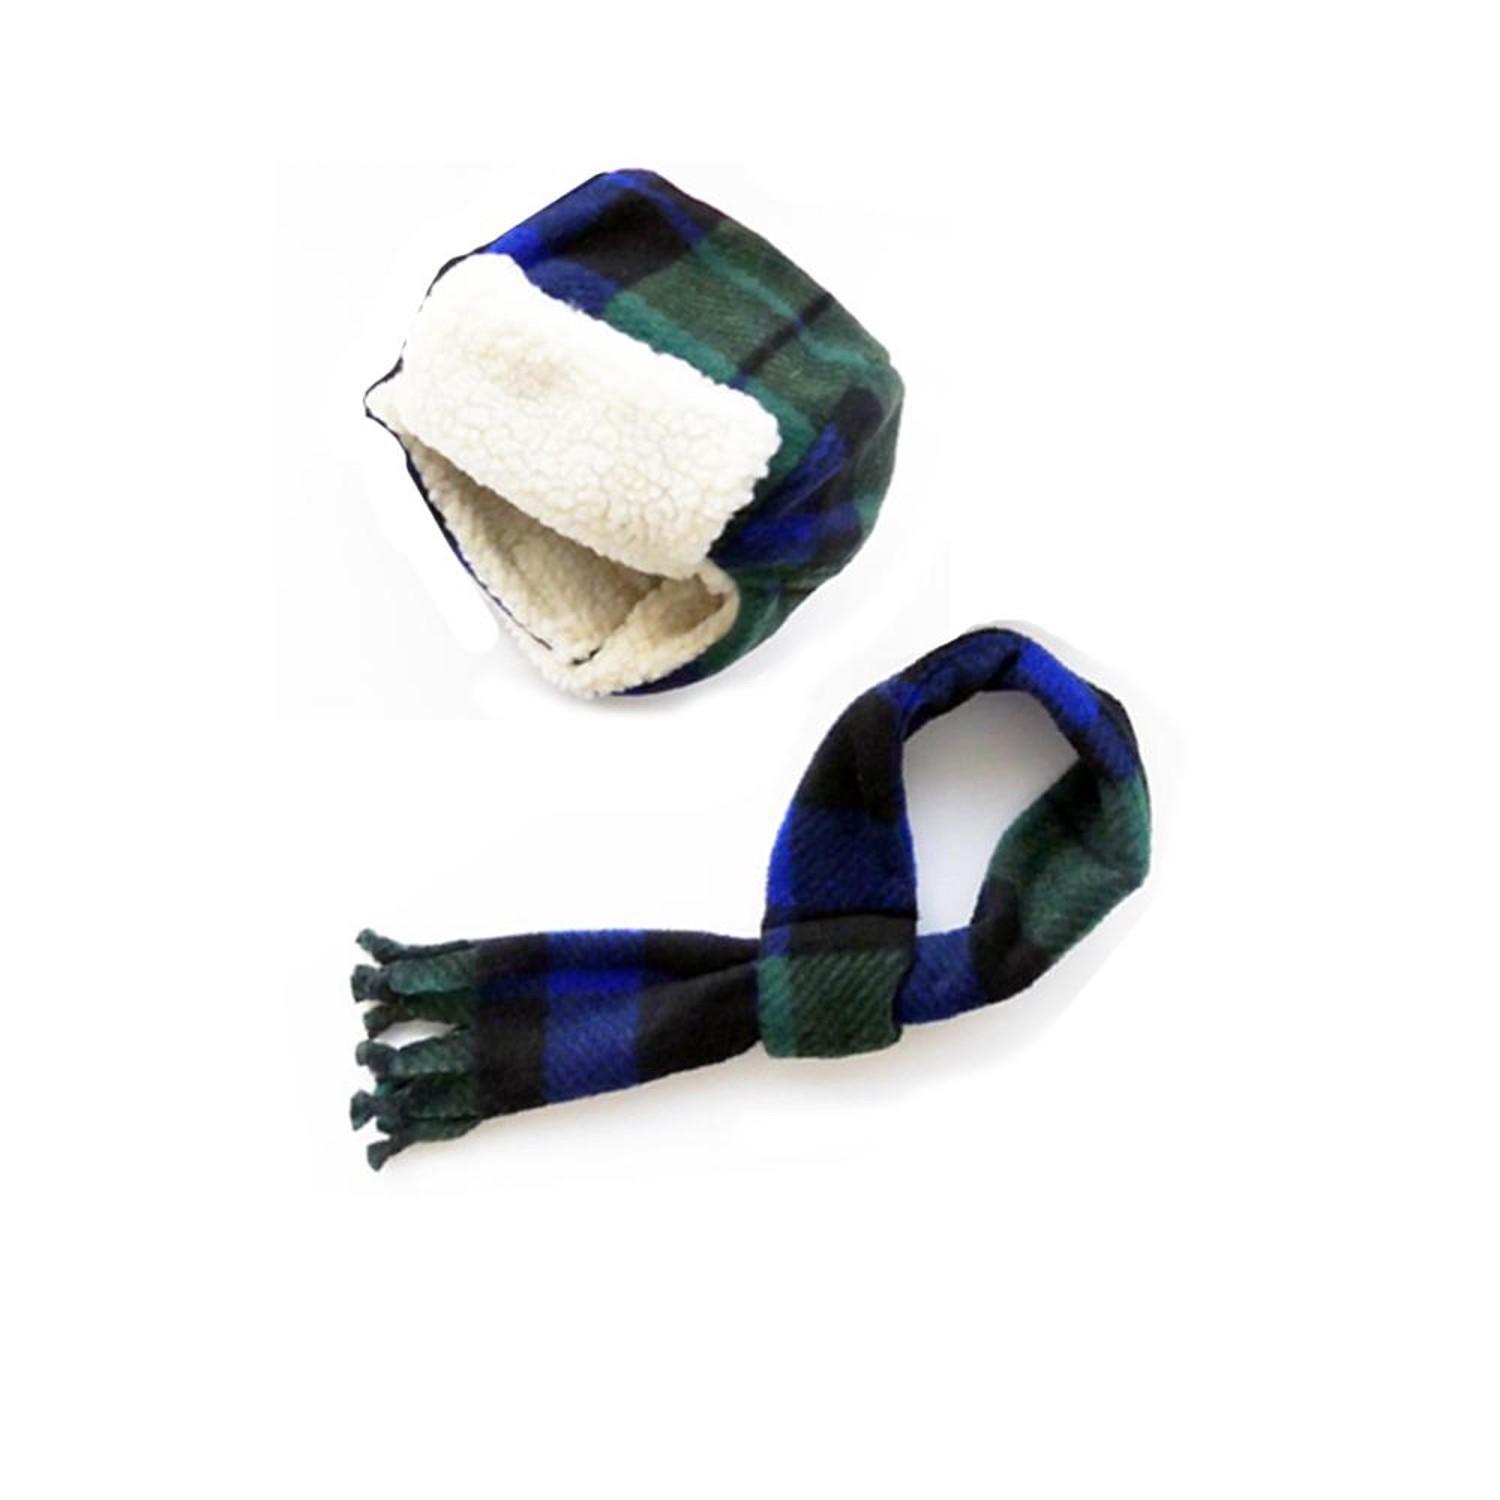 My Canine Kids Aviator Hat and Scarf Set for Dogs - Black Watch Plaid